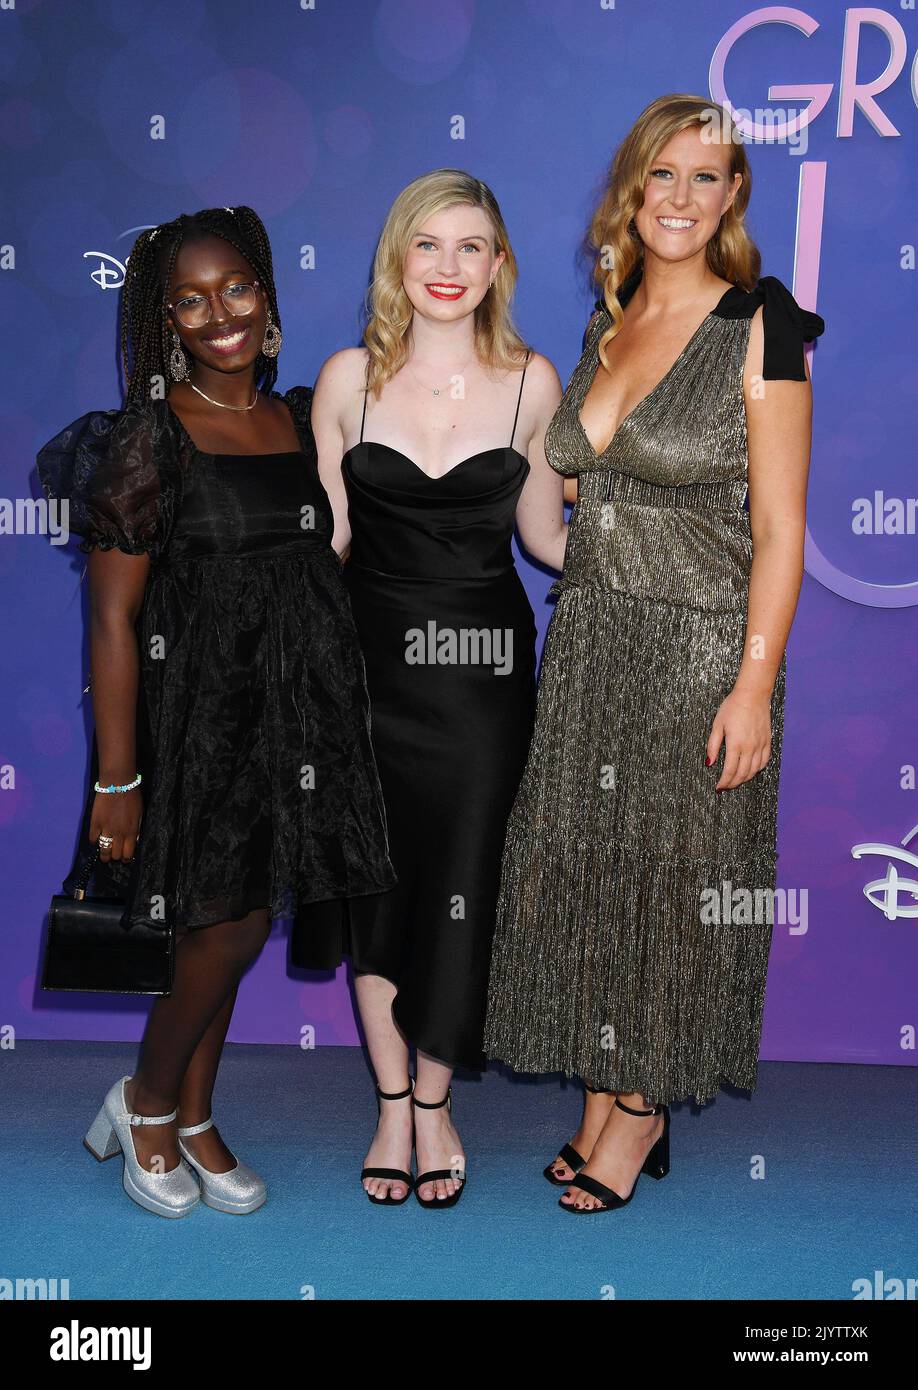 Hollywood, Ca. 07th Sep, 2022. (L-R) Sofia Ongele, Alex Crotty and Nicole Galovski attend Disney 's 'Growing Up' Red Carpet Premiere Event at NeueHouse Hollywood on September 07, 2022 in Hollywood, California. Credit: Jeffrey Mayer/Jtm Photos/Media Punch/Alamy Live News Stock Photo